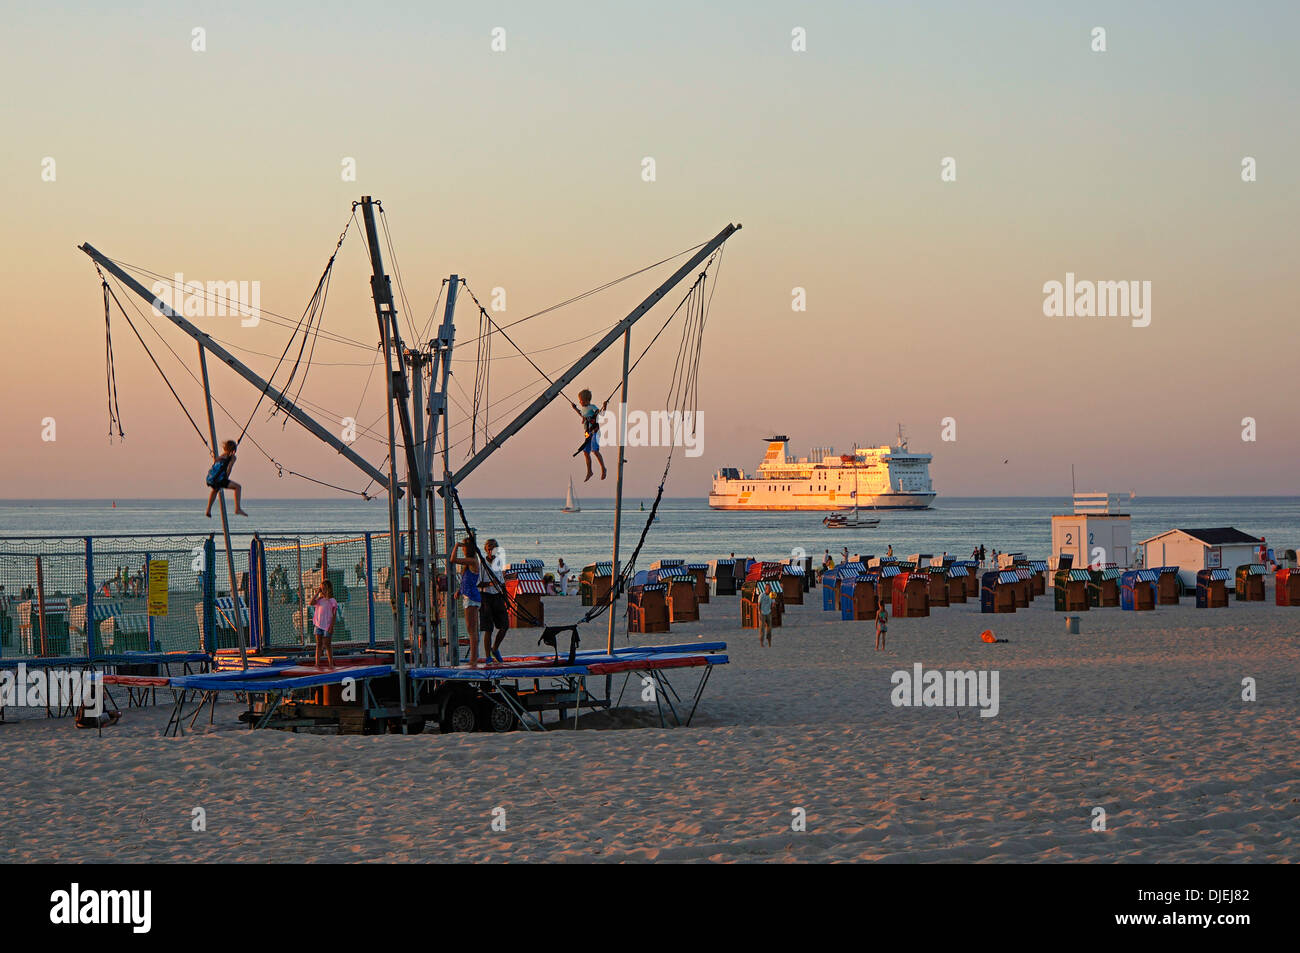 Beach of Warnemuende, Kids playing, Baltic Sea, Ferry, Germany Stock Photo